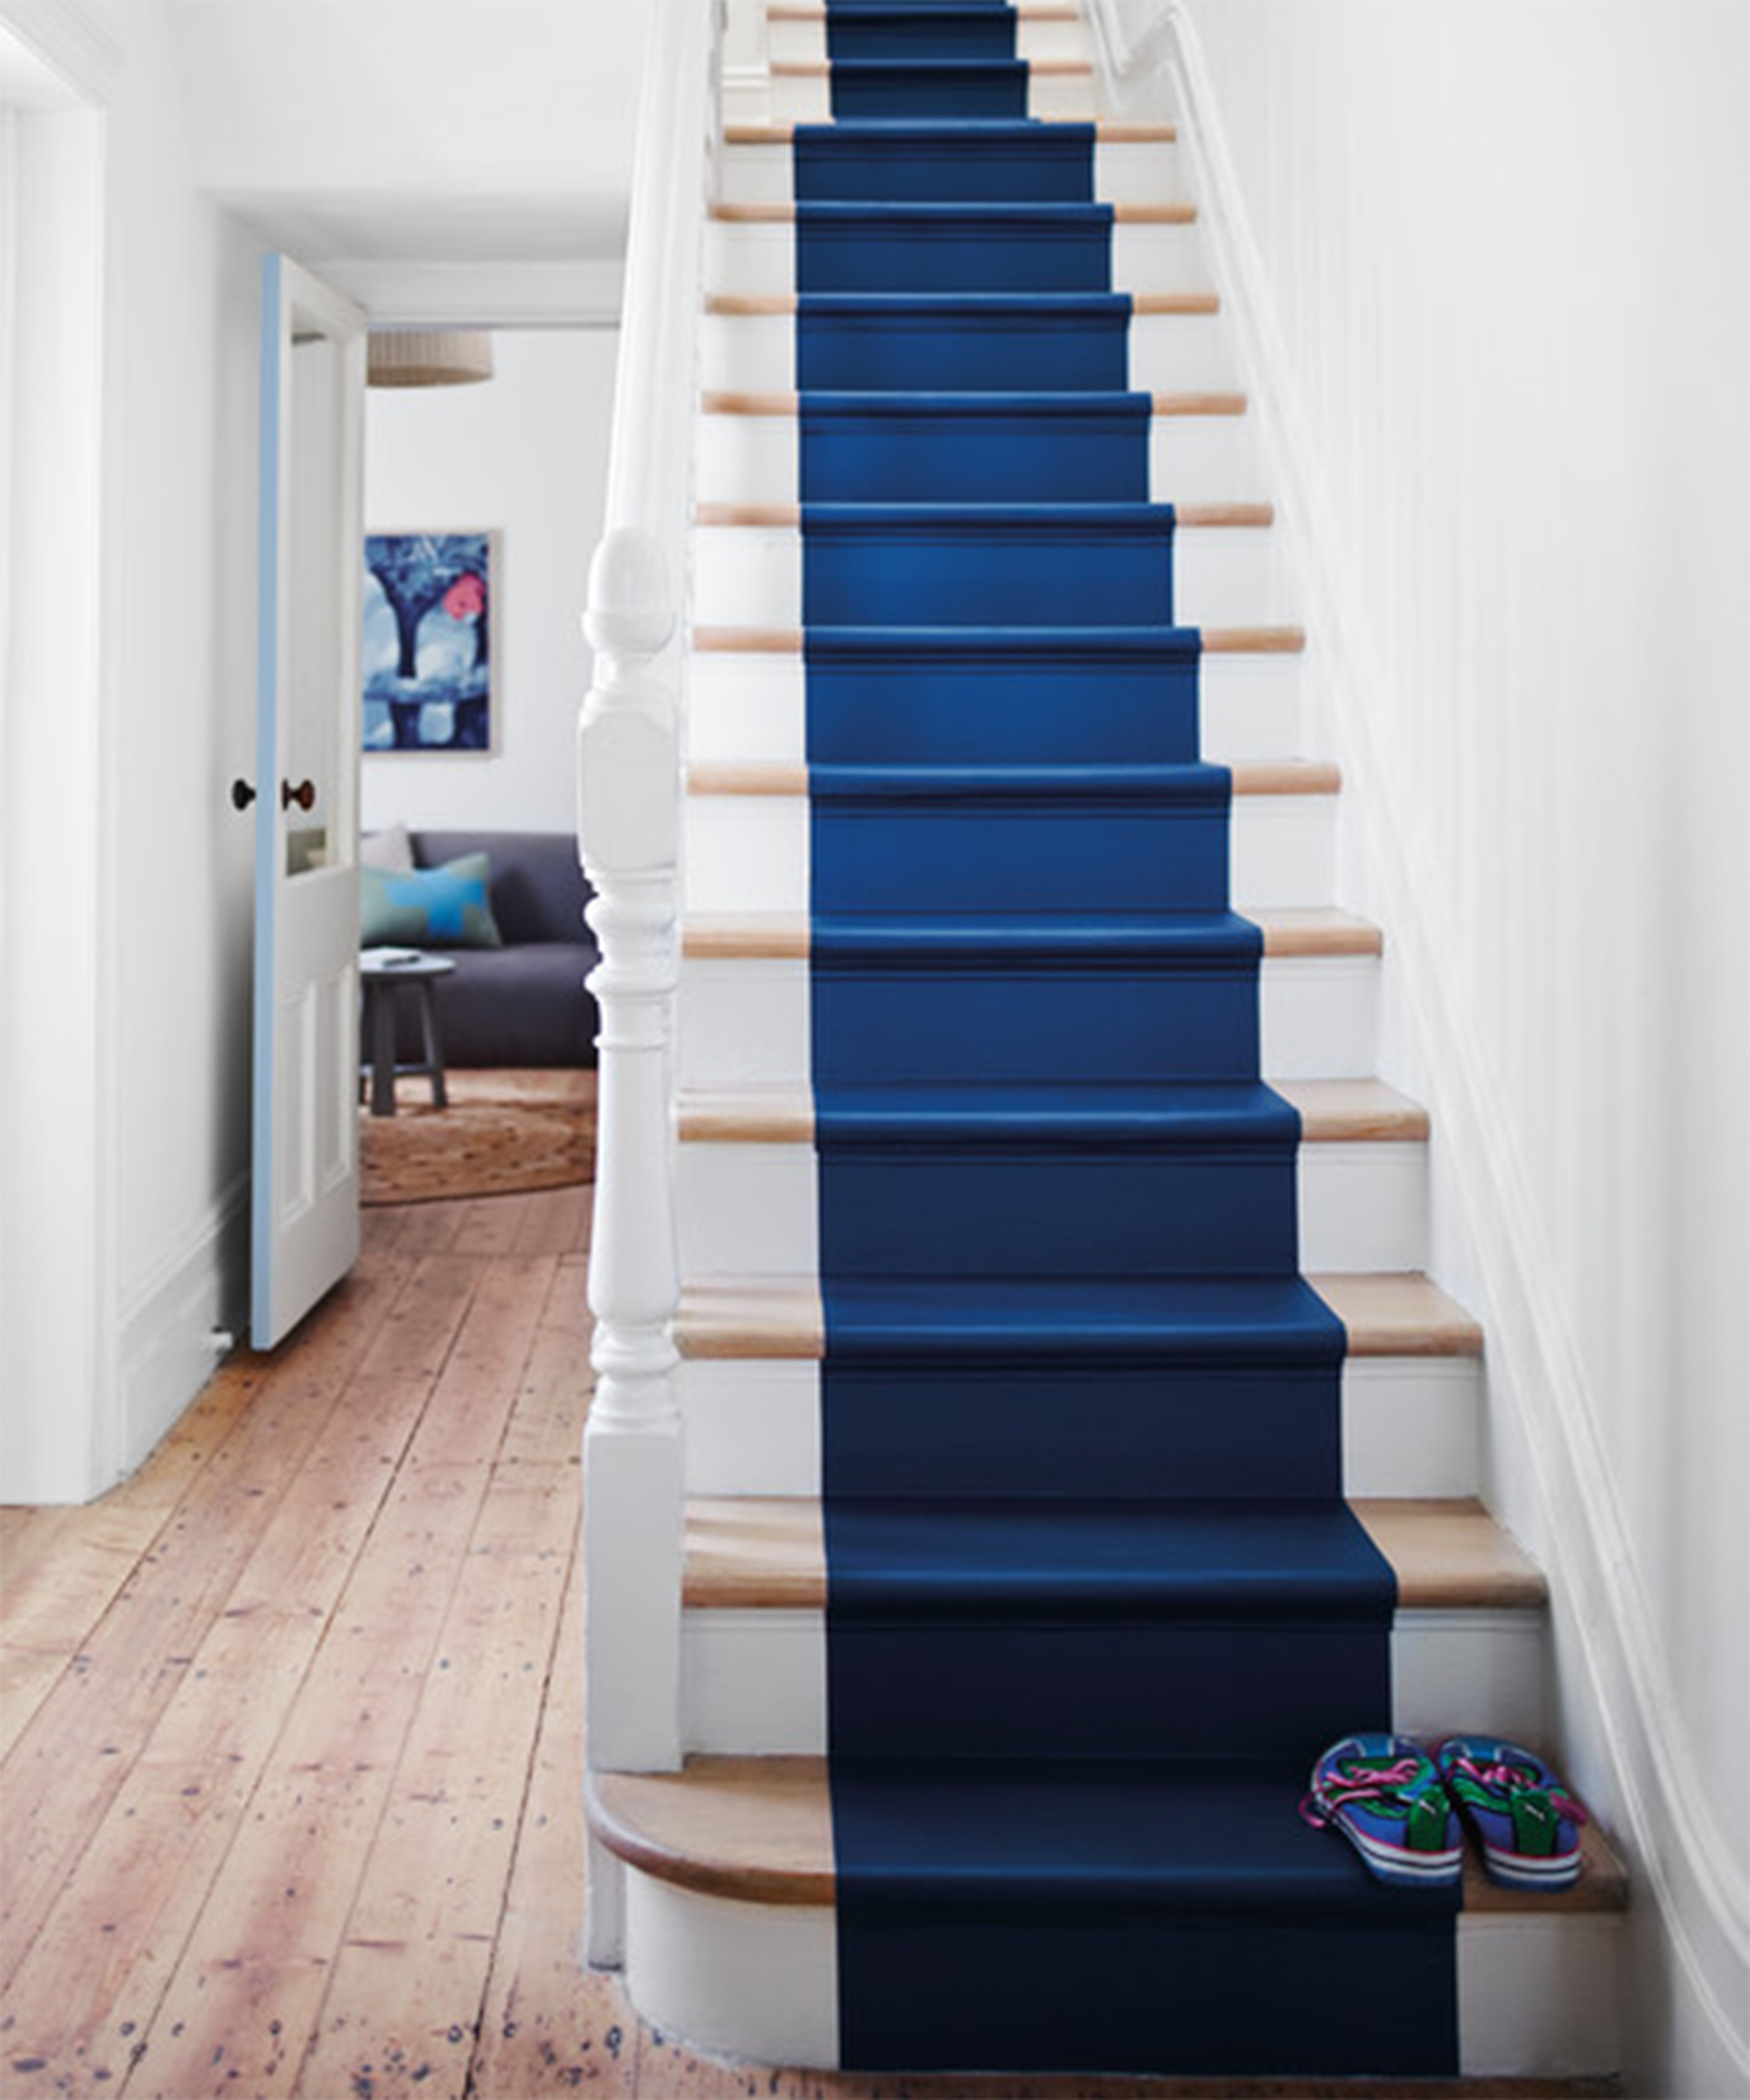 White and blue staircase in hallway by Dulux